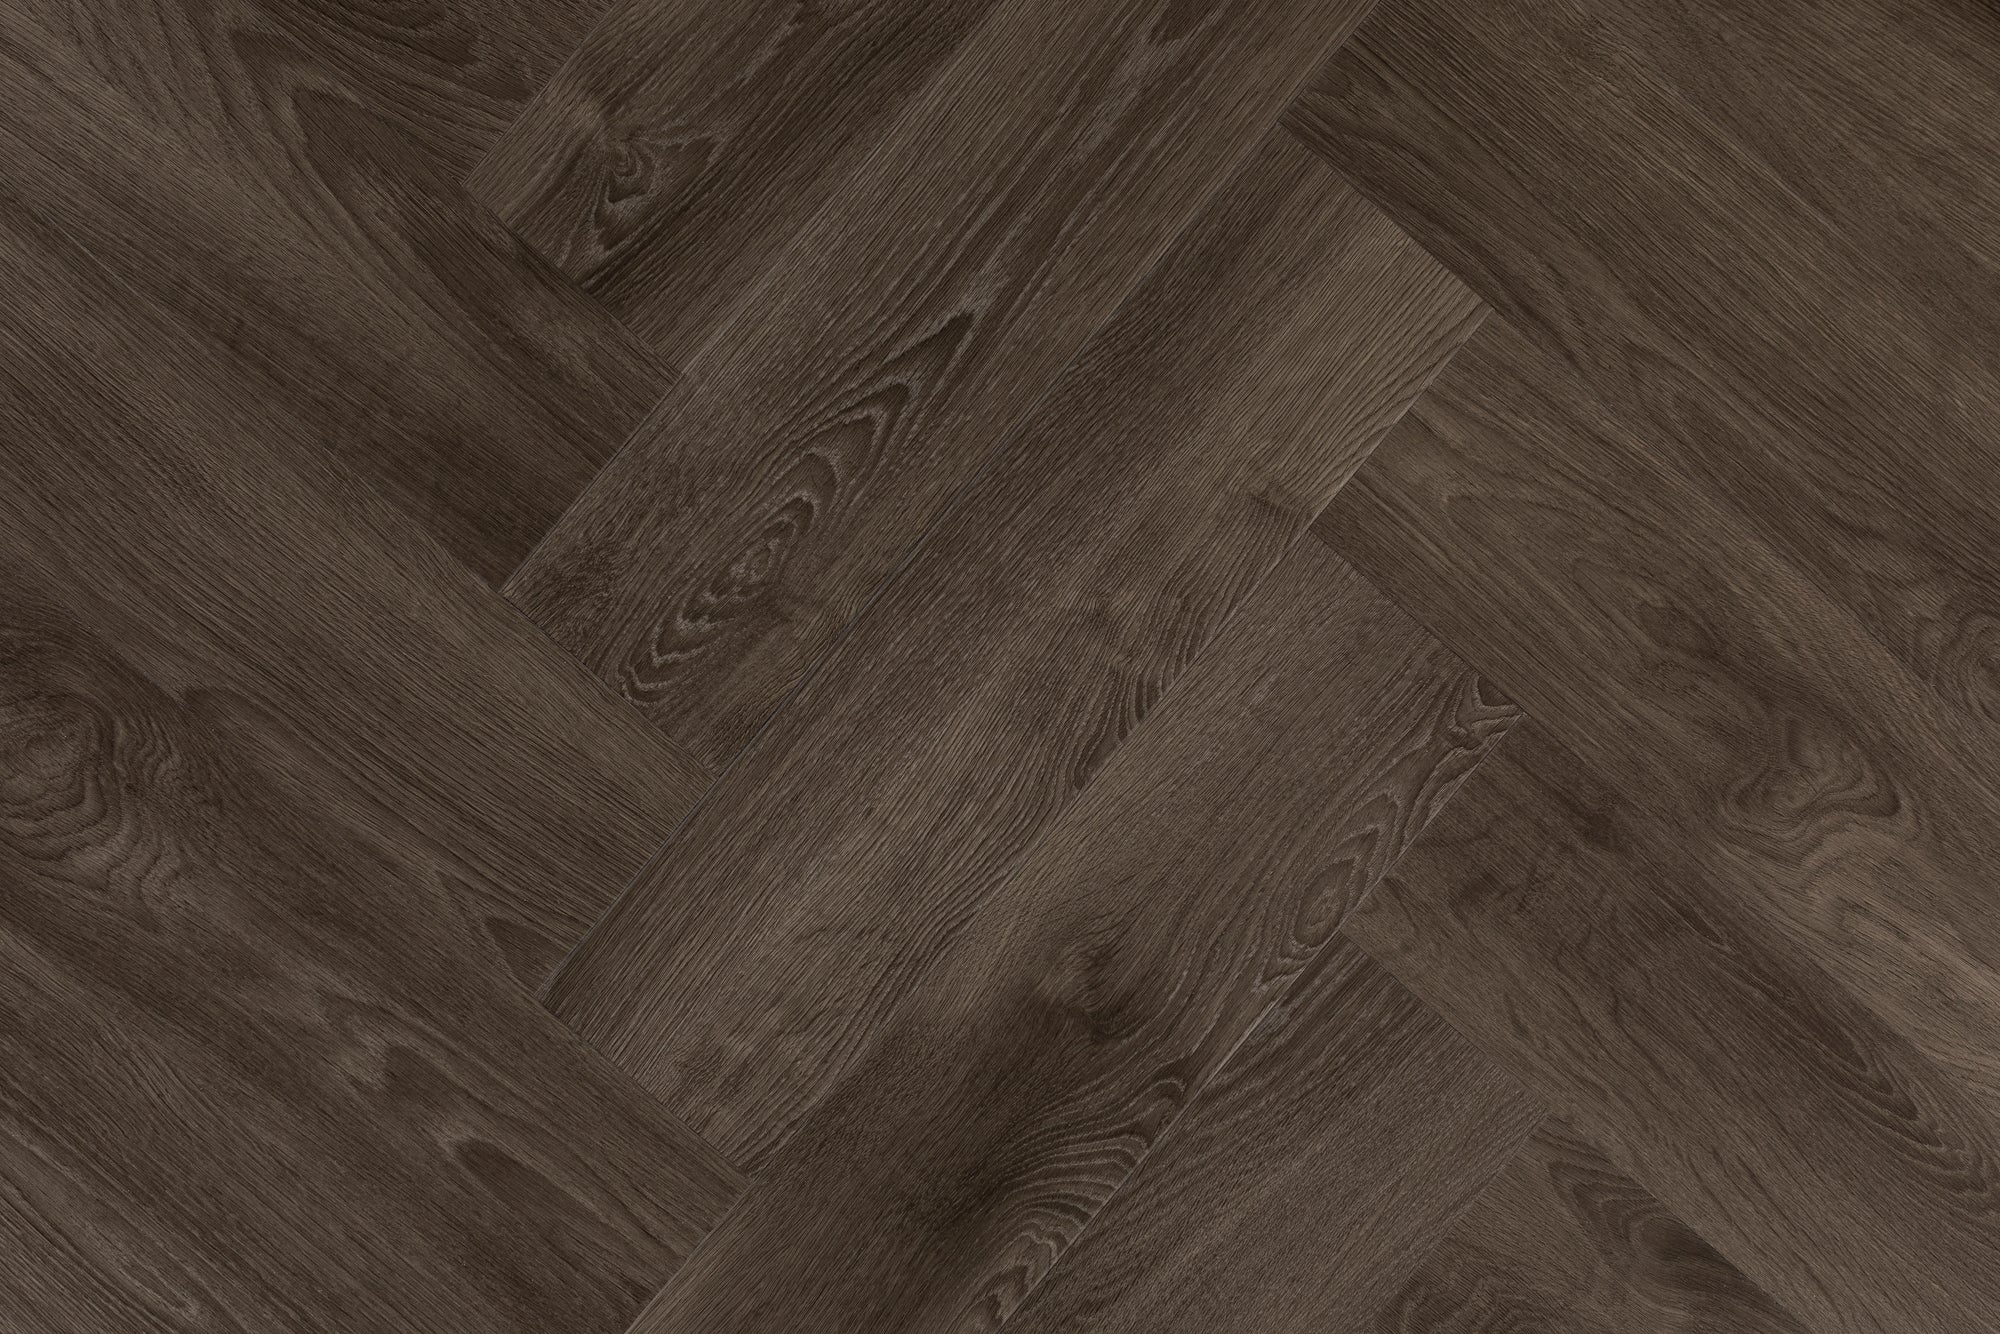 Free sample of Blanched Carbon Glue Down  engineered hardwood floor from our Herringbone collection